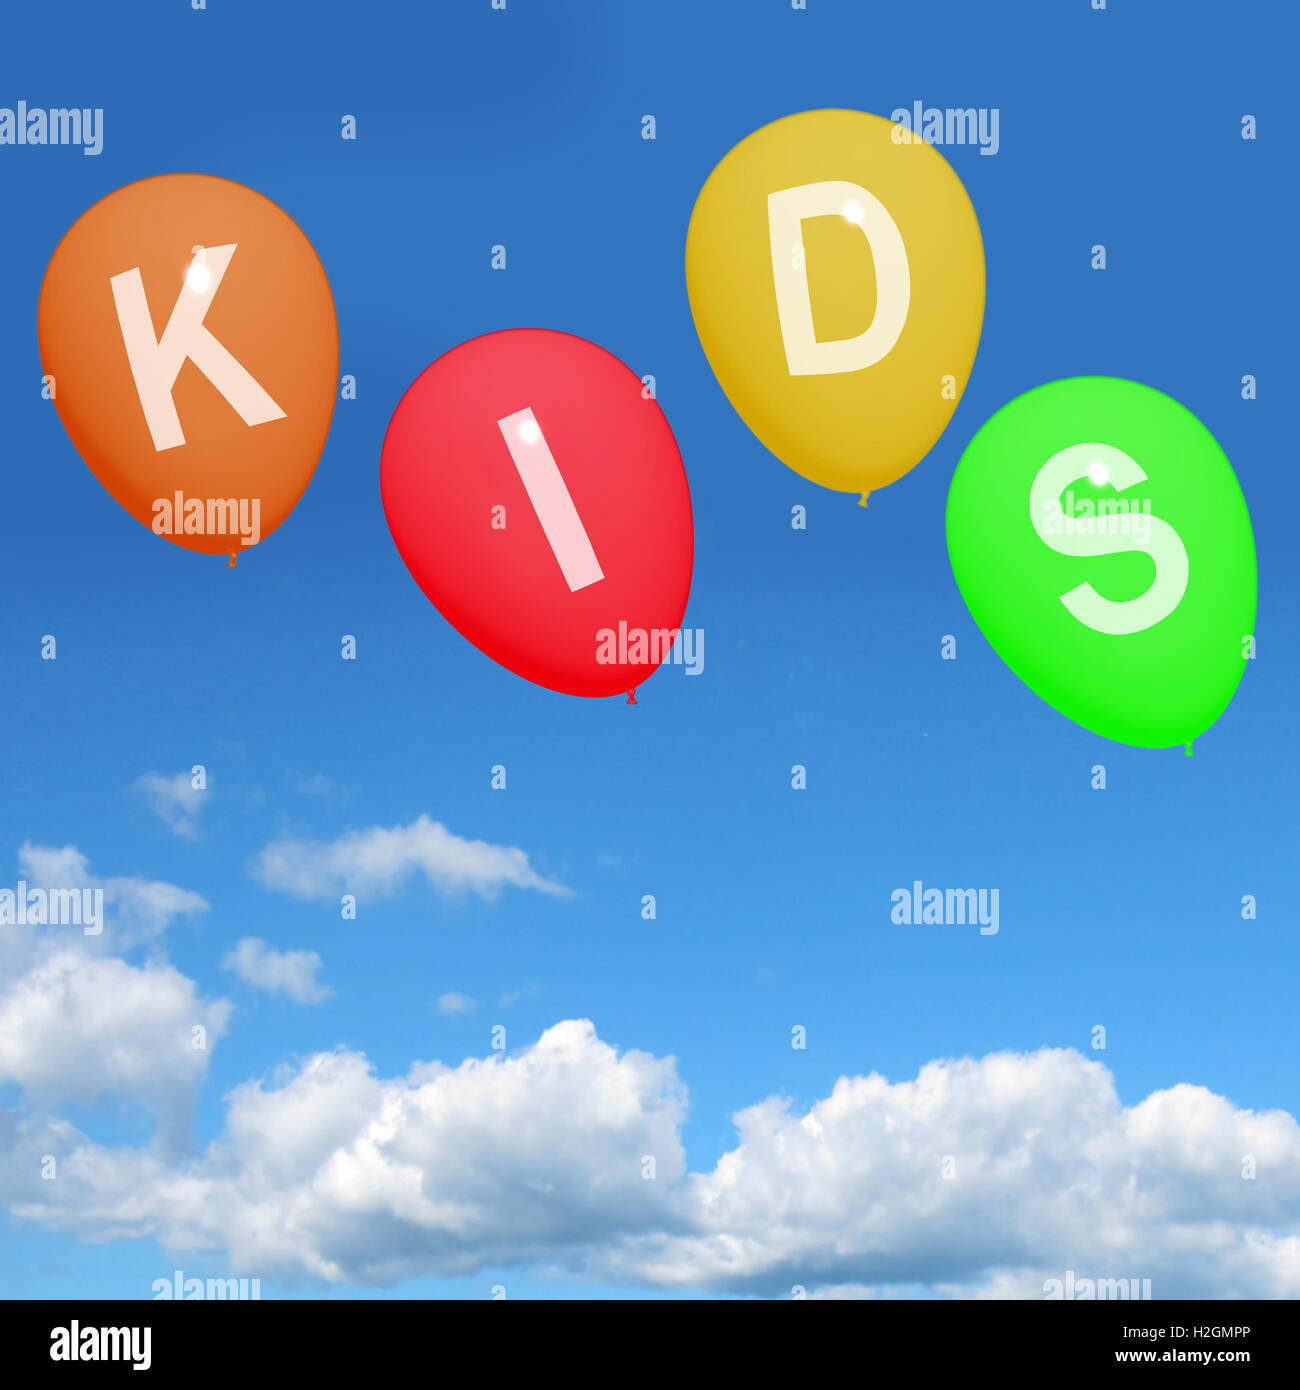 Kids Balloons Show Children Toddlers or Youngsters Stock Photo